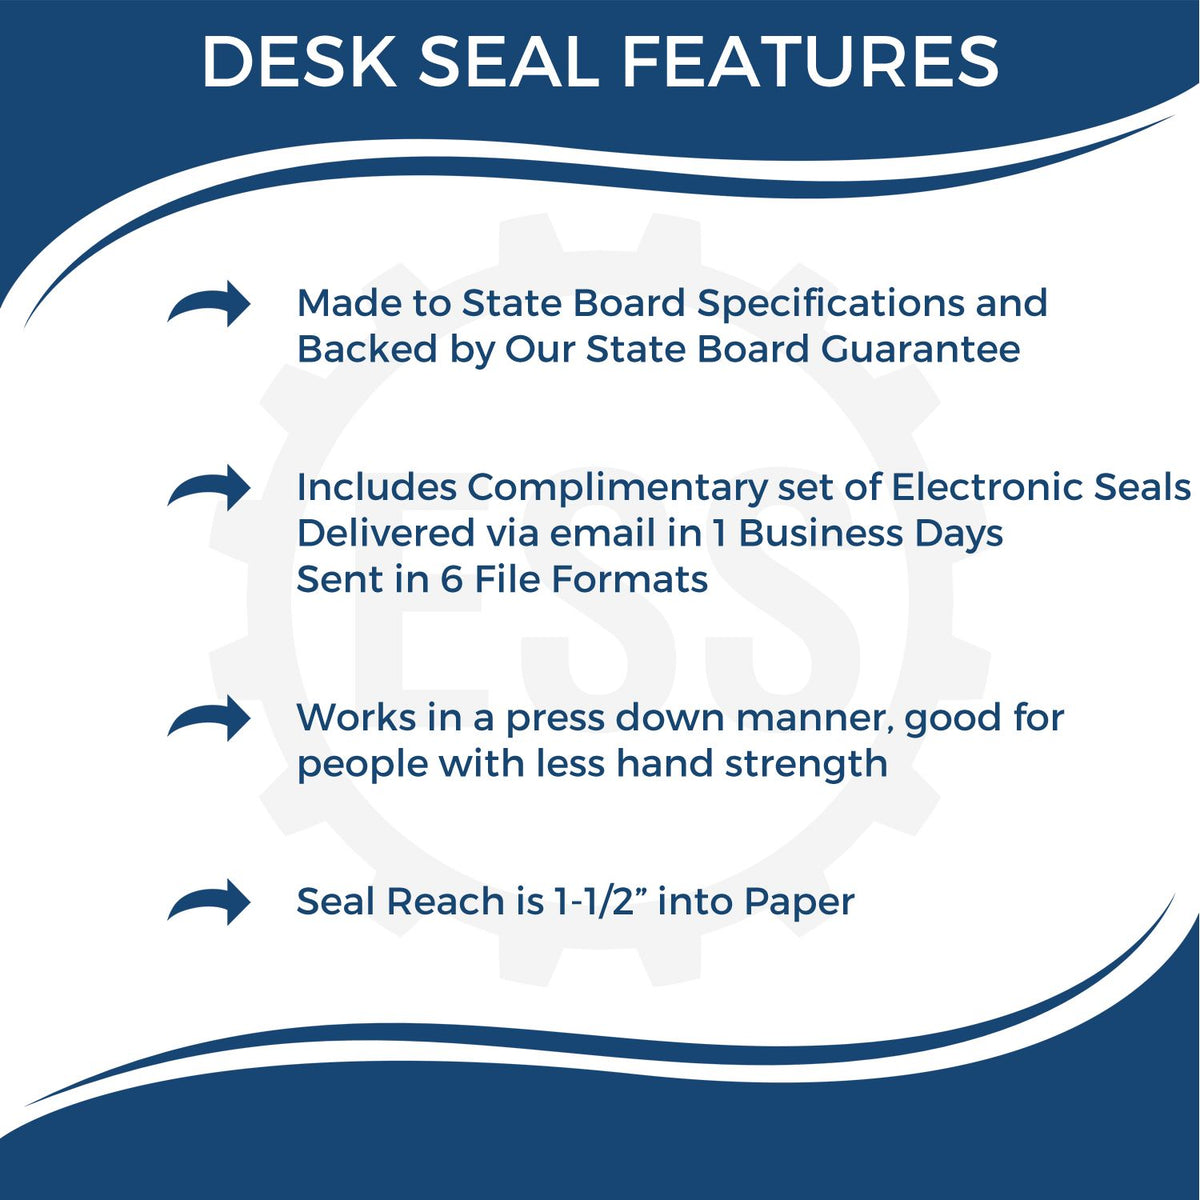 A picture of an infographic highlighting the selling points for the Pennsylvania Desk Architect Embossing Seal